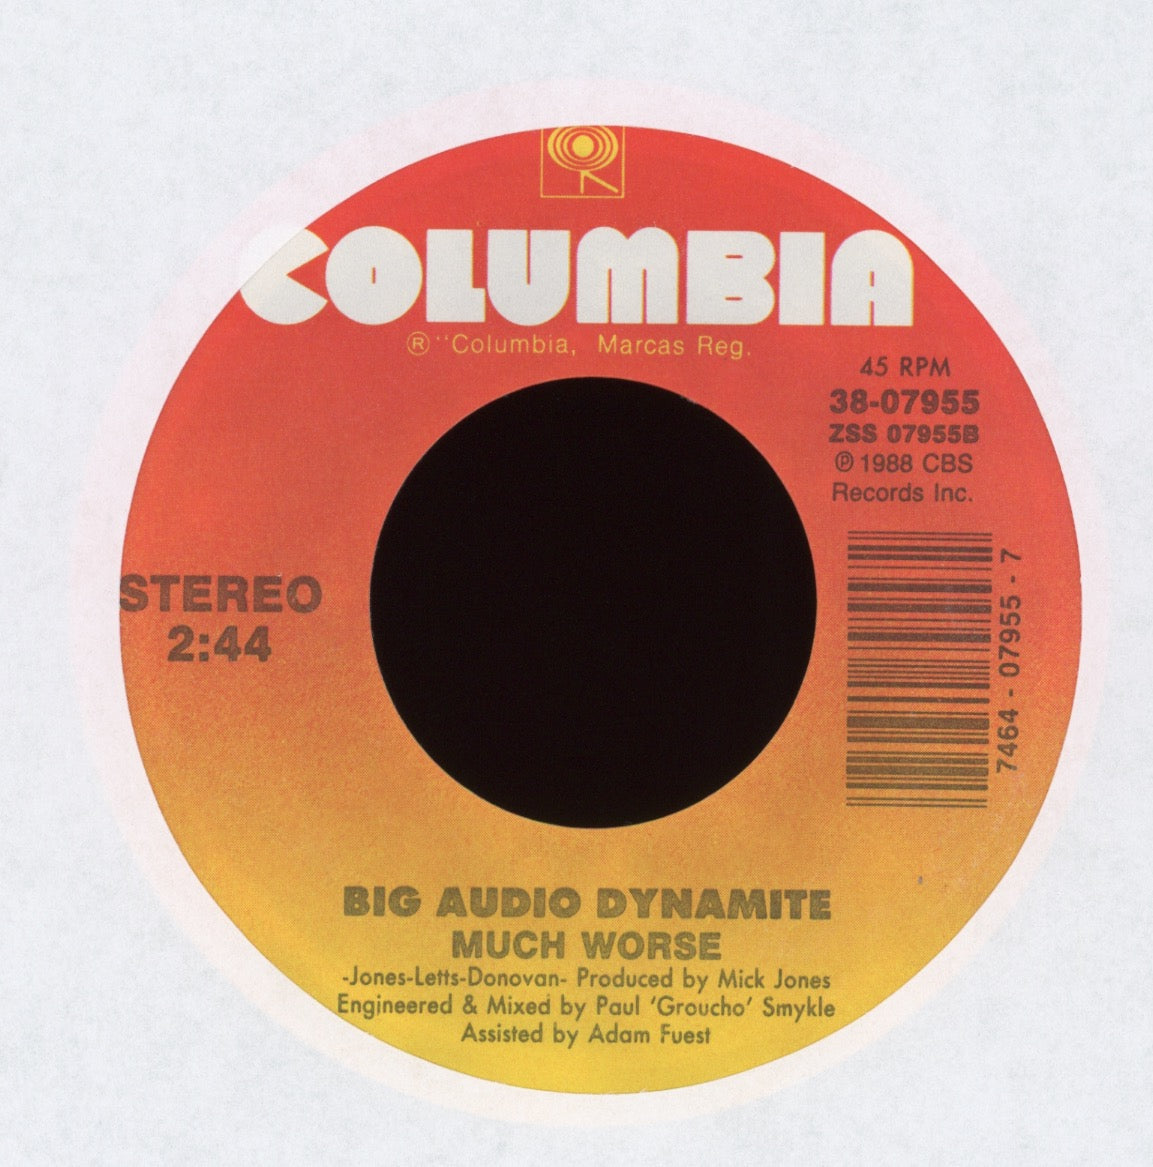 Big Audio Dynamite - Just Play Music! on Columbia With Picture Sleeve